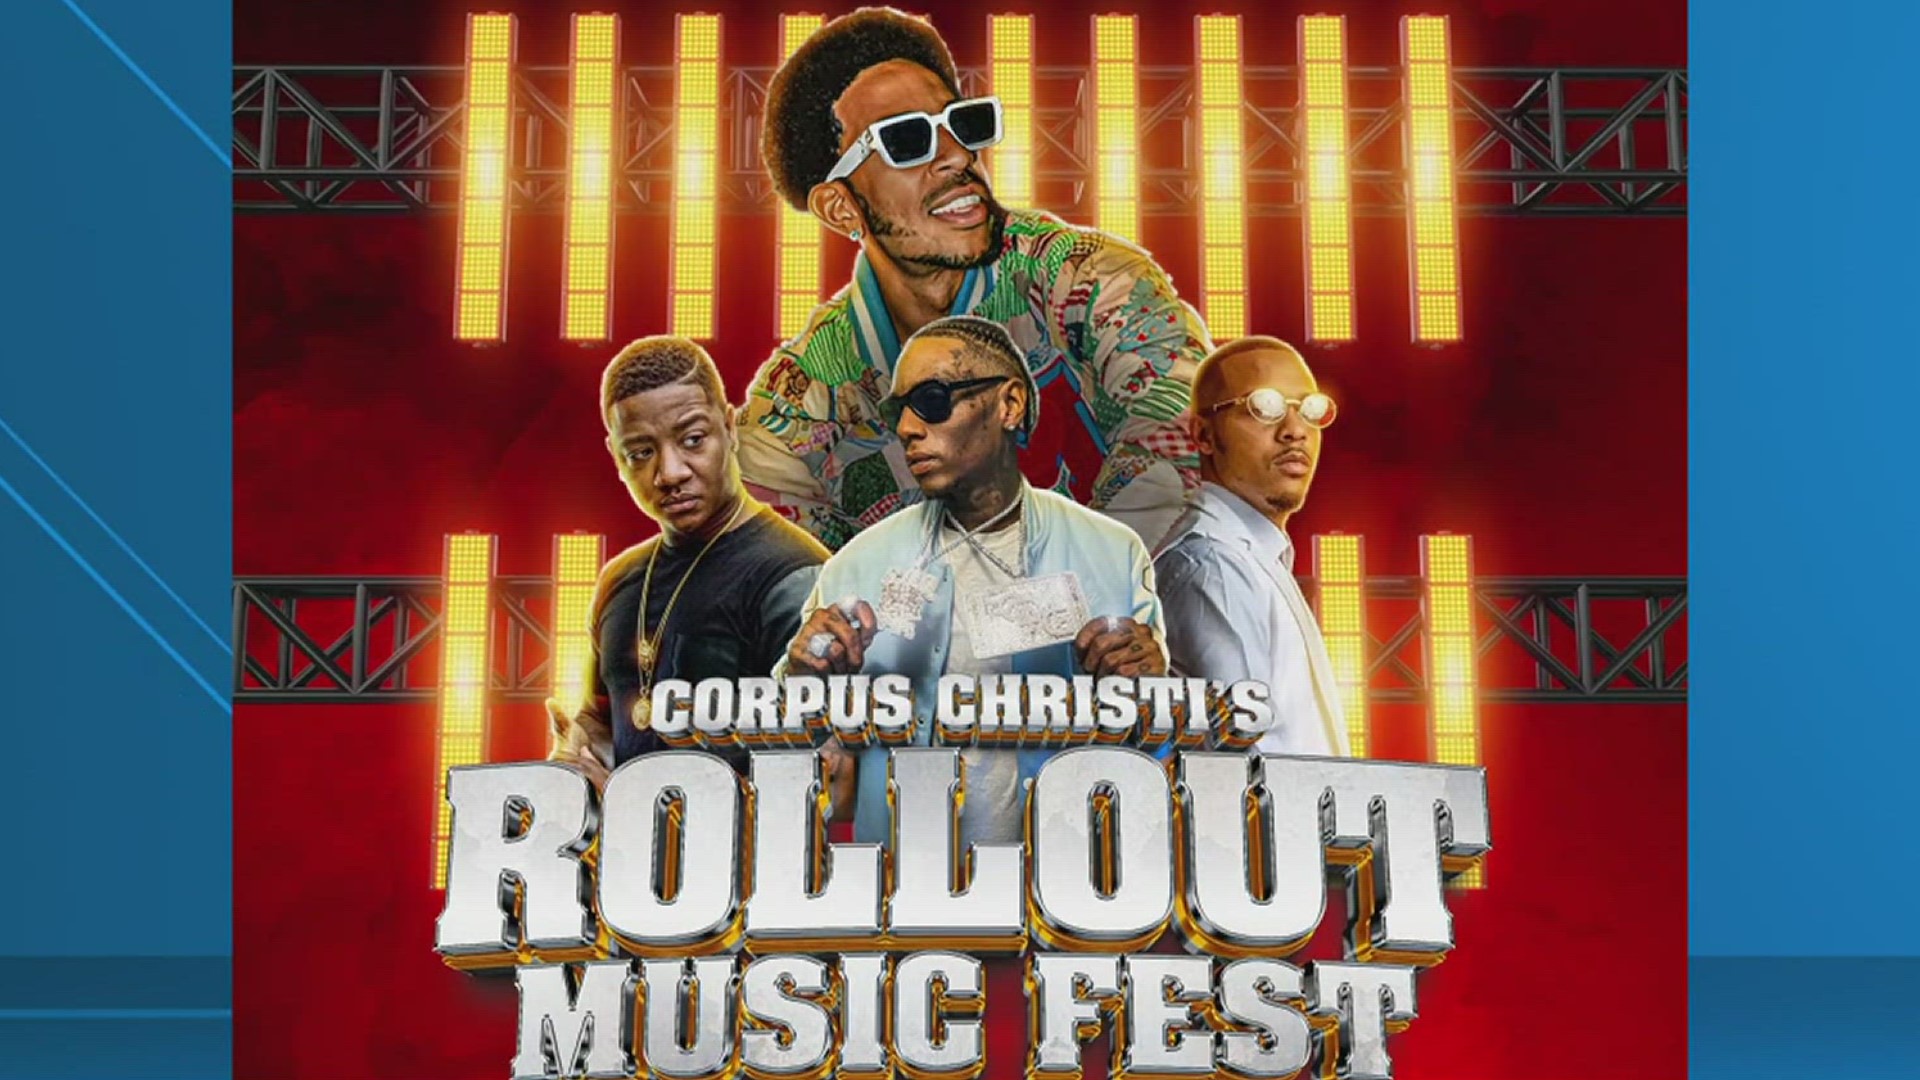 And not just 'Luda,' but Yung Joc, Soulja Boy and Bow Wow too! Get excited!